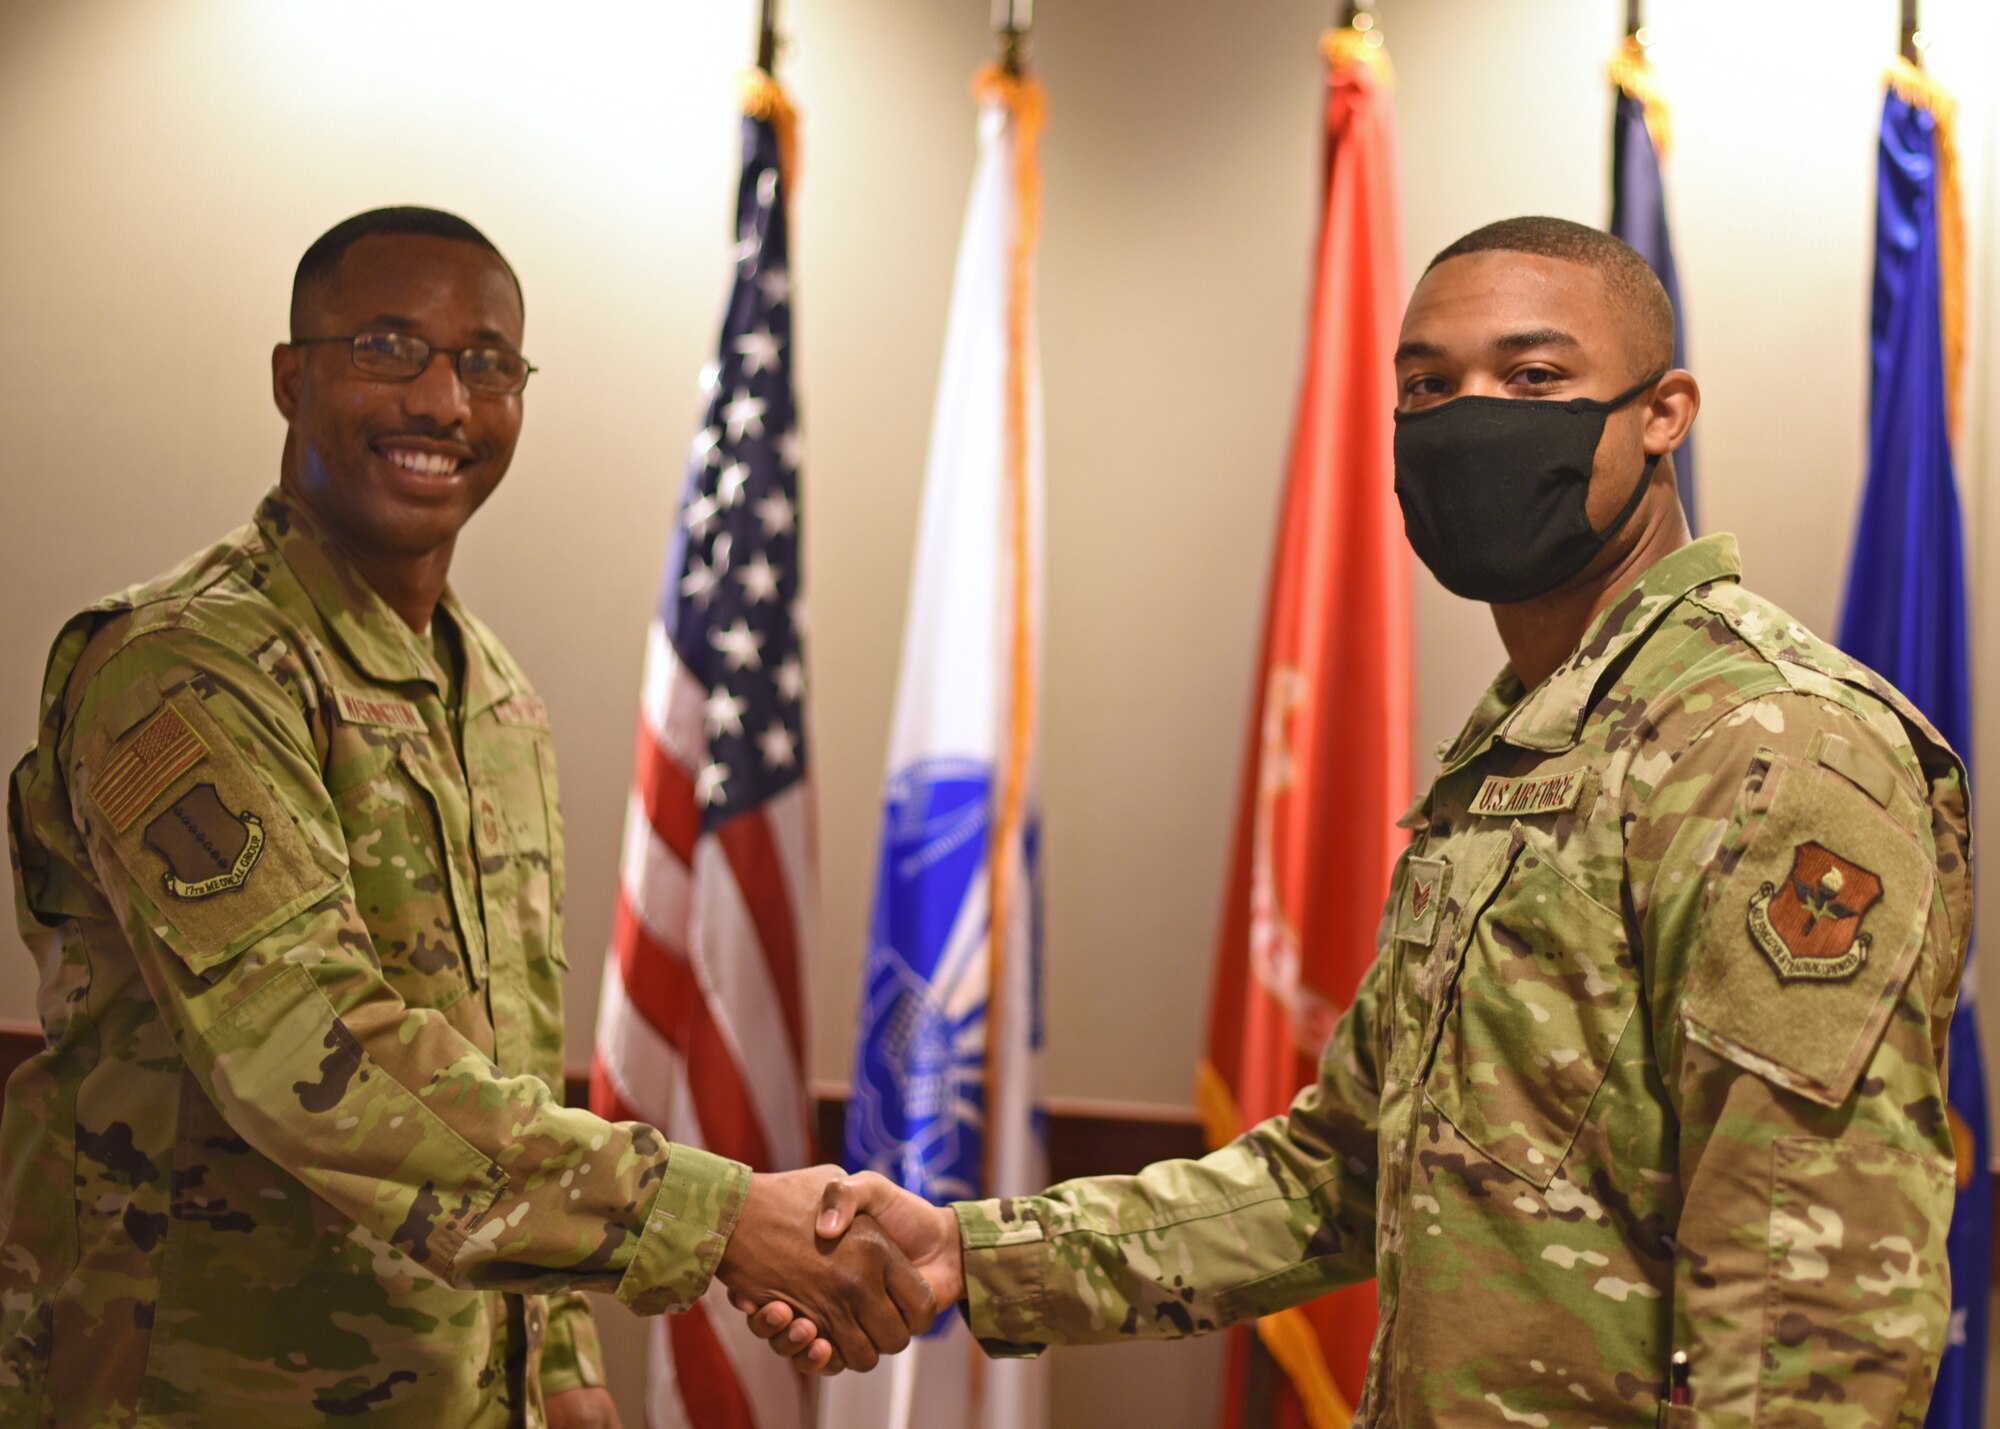 U.S. Air Force Chief Master Sgt. Marcus Washington, 17th Medical Group superintendent, coins Staff Sgt. Nigel Jaggard, 17th Logistics Readiness Squadron logistics planner, at the 17th Training Wing Spotlight in the Norma Brown building on Goodfellow Air Force Base, Texas, May 20, 2021. Jaggard was chosen as the 17th TRW Spotlight for his hard work in the mission to train, develop, and inspire the future force. (U.S. Air Force photo by Senior Airman Abbey Rieves)